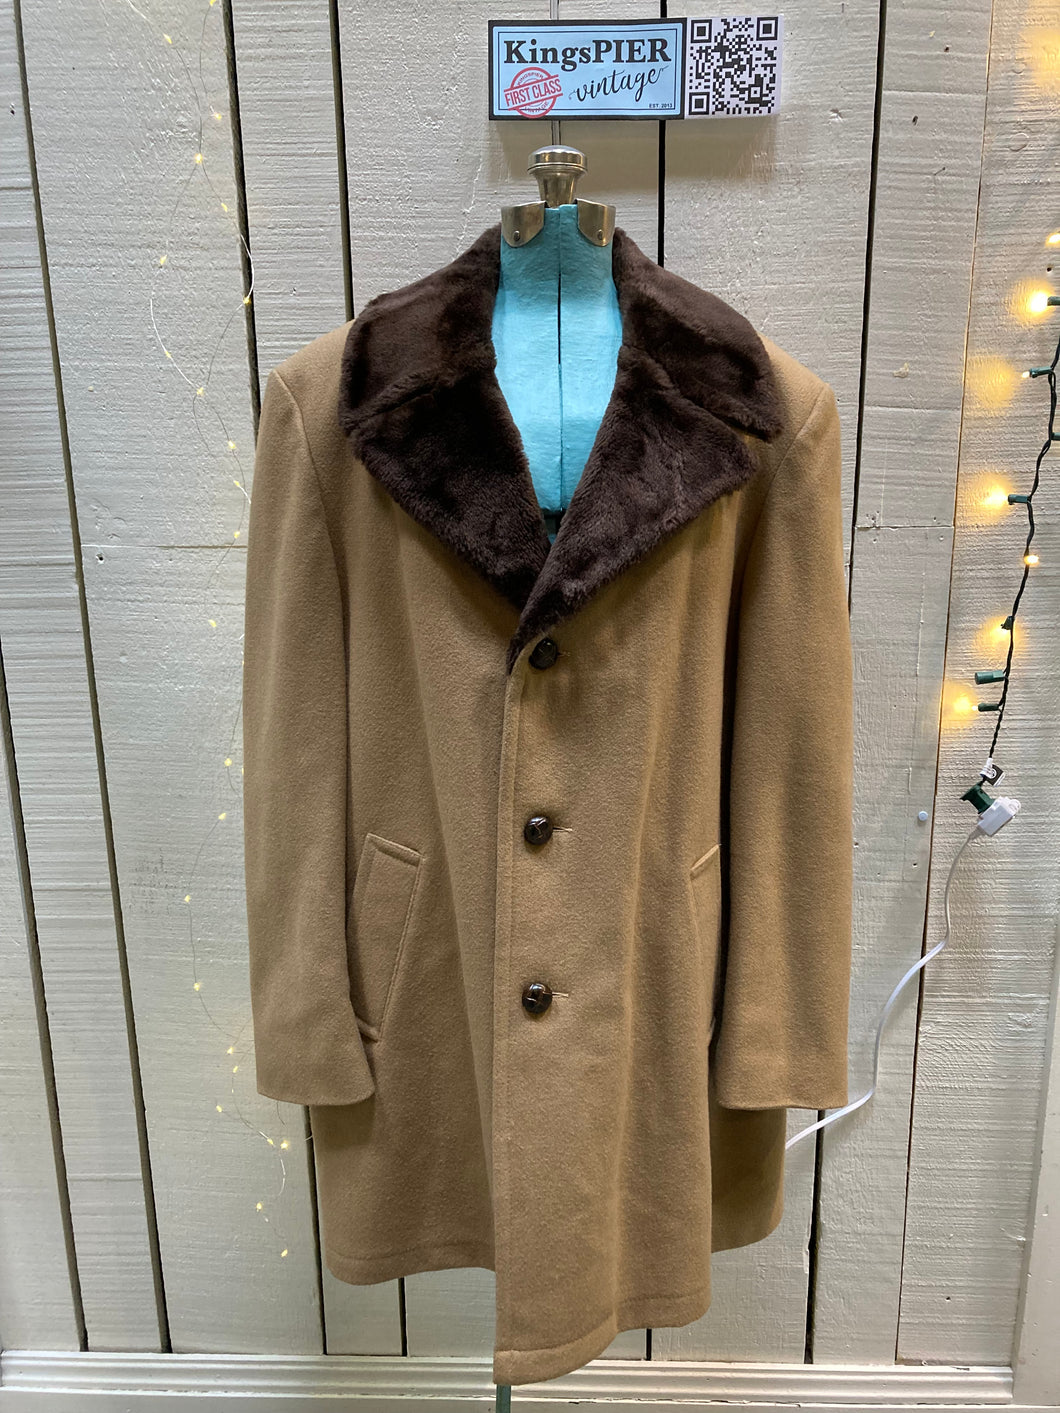 Kingspier Vintage - Vintage Anderson Little wool blend coat (70% wool/ 30% acrylic) with button closures, two front pockets and sherpa lining.